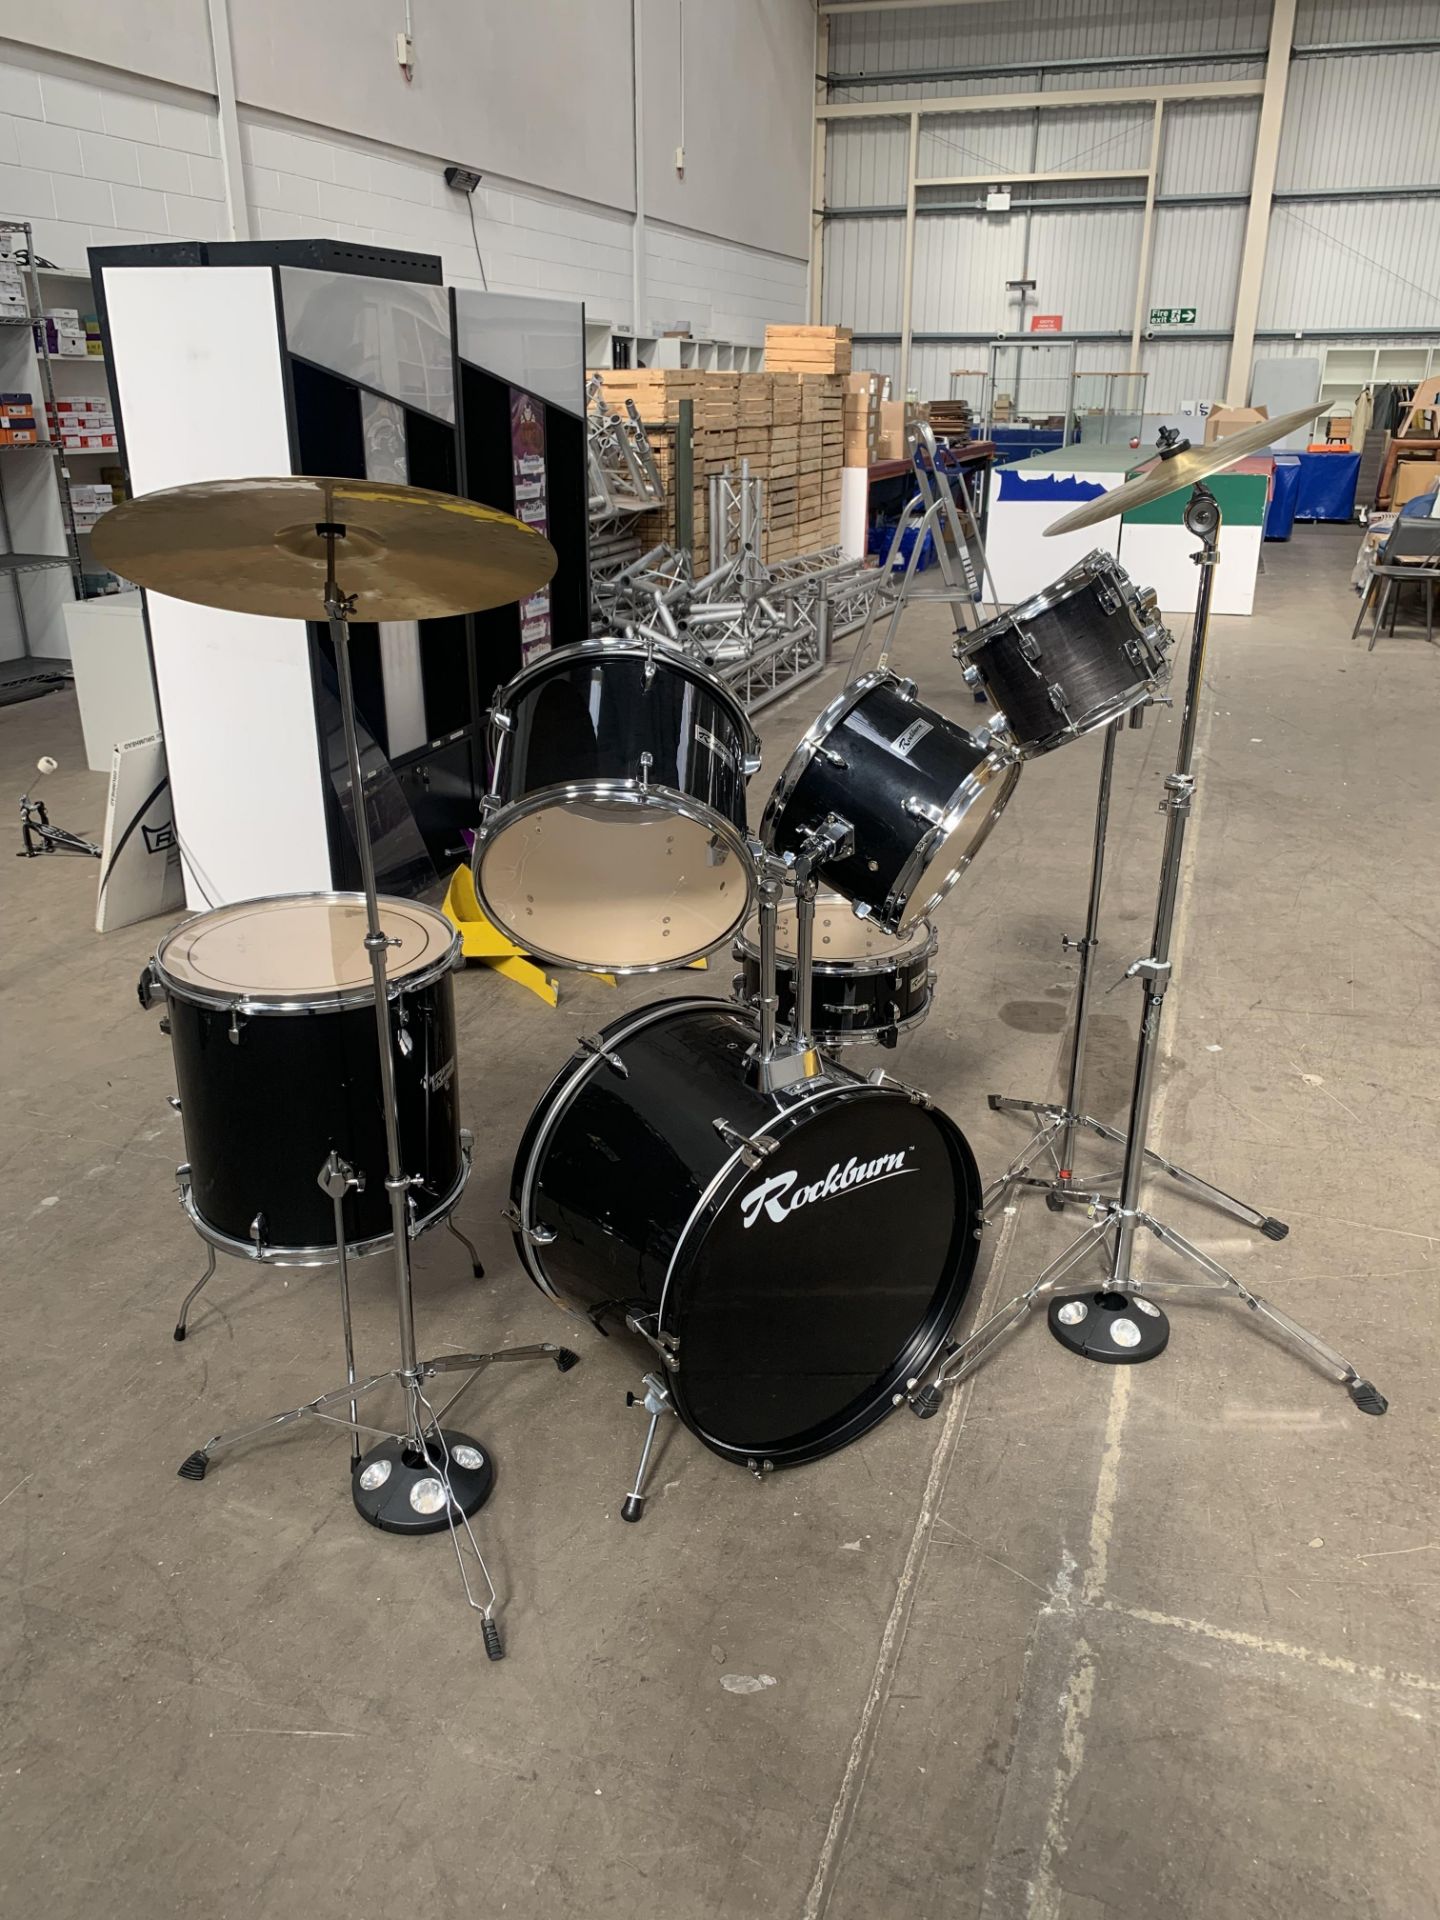 Rockburn 5-piece Drum Kit, together with 2x Symbols and 2x Stagg TIM+ Drums - Image 2 of 13